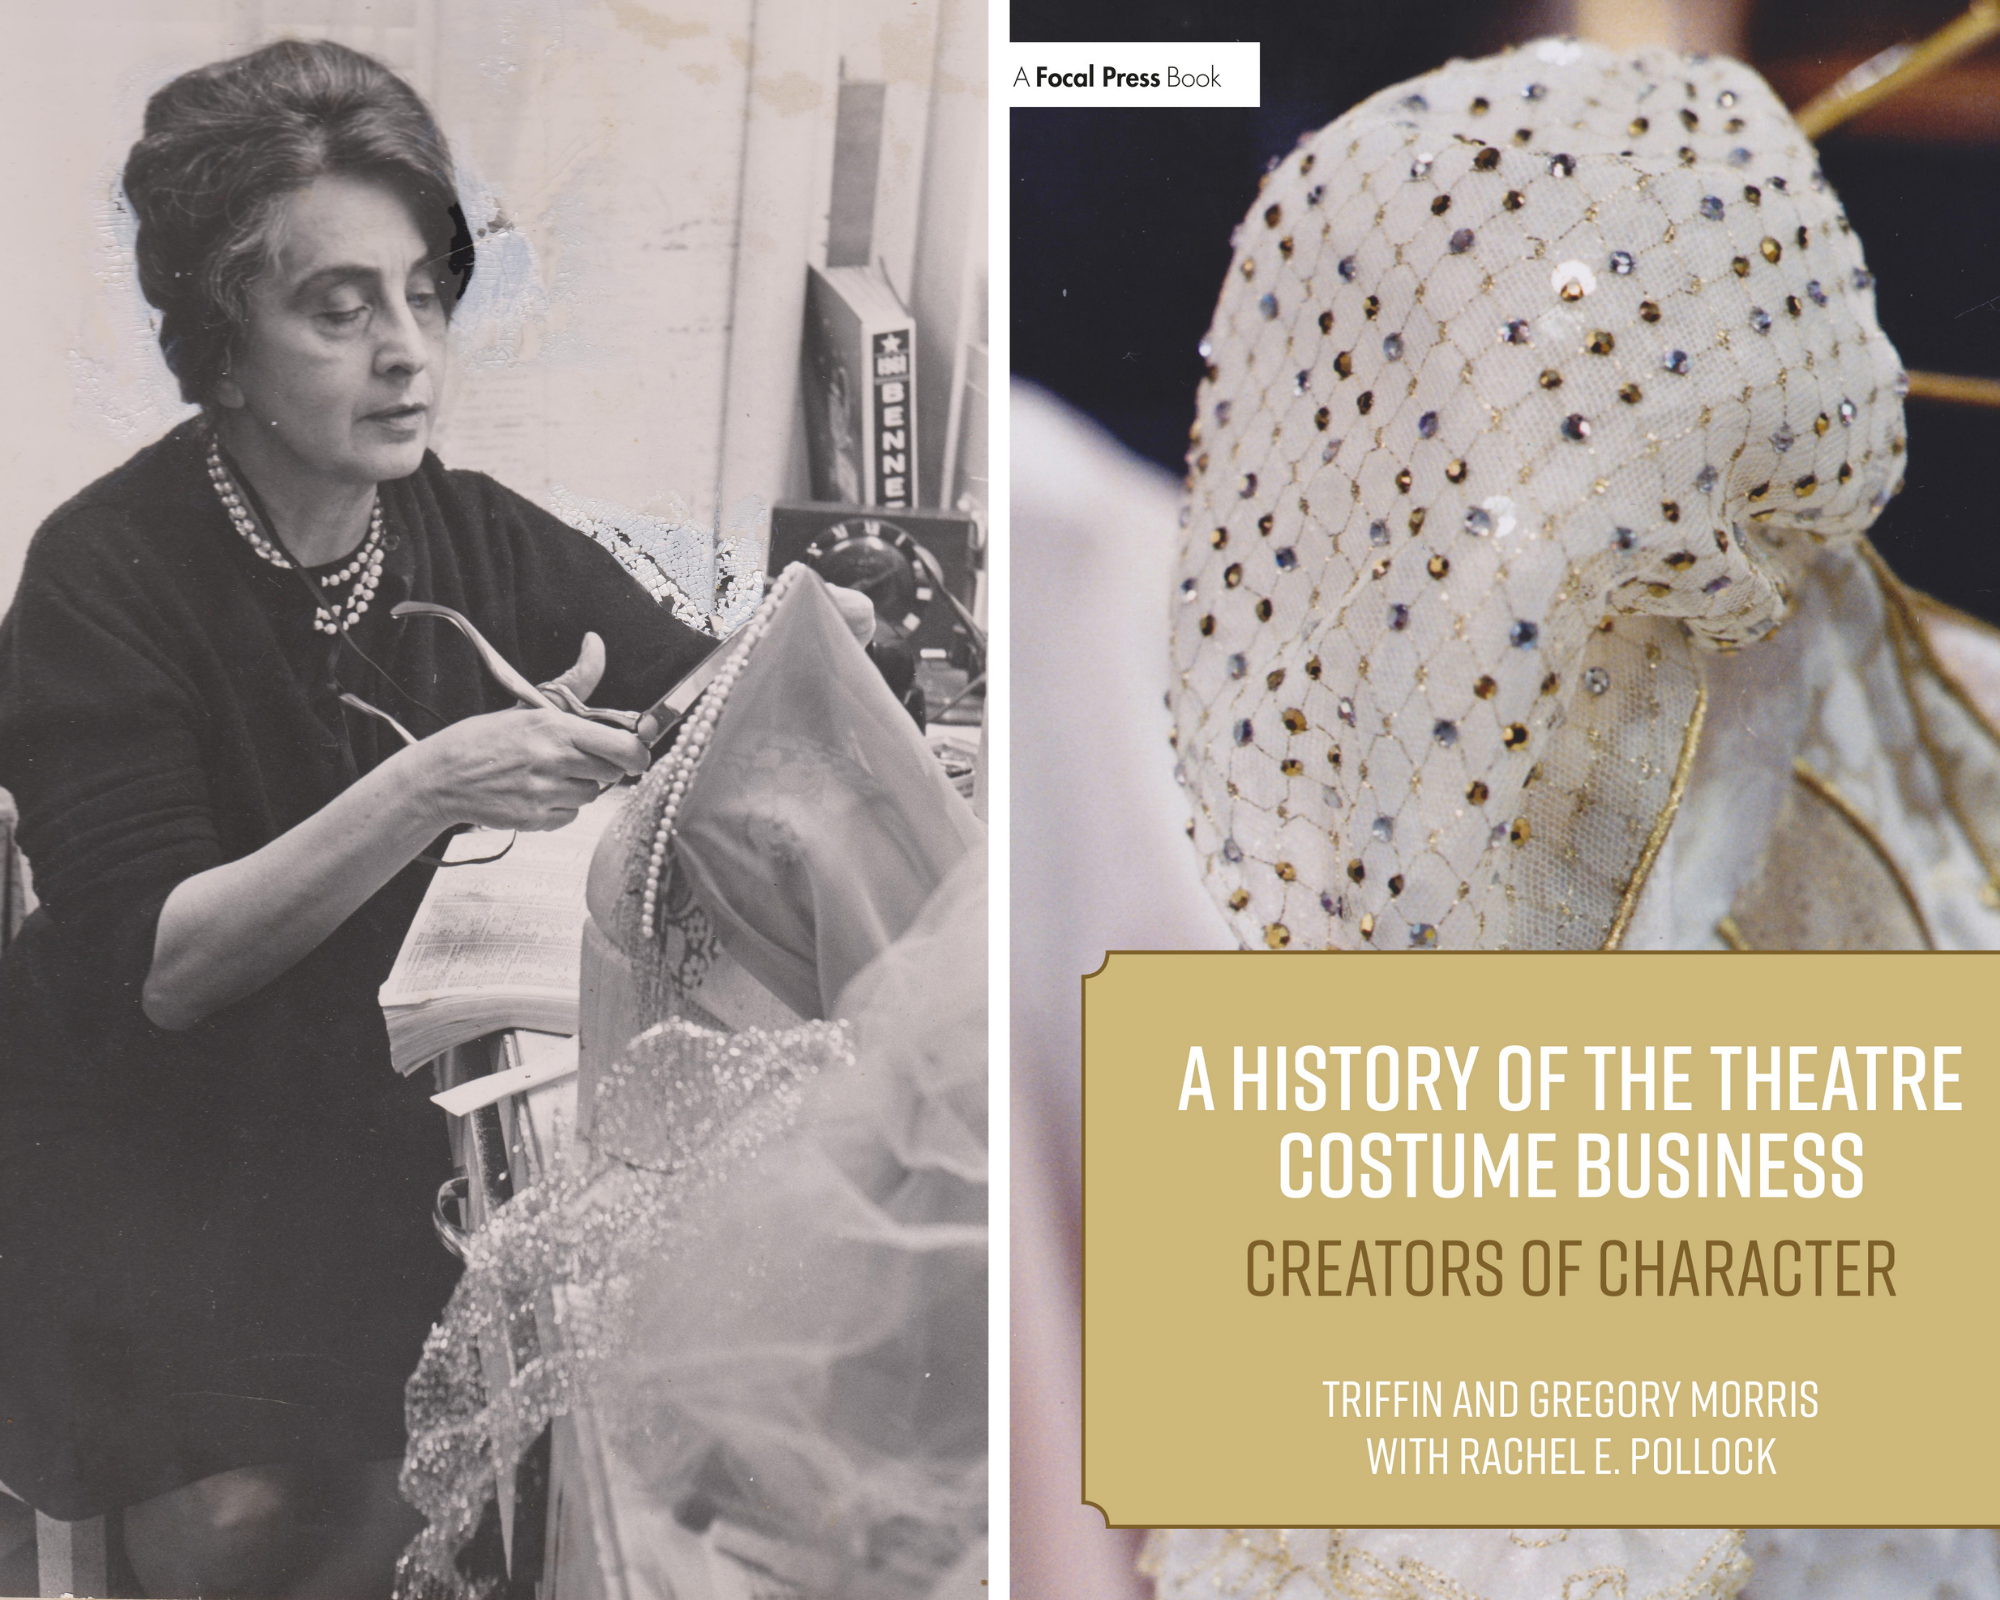 On the left, photo of costume designer Helene Pons, on the right book cover for the featured book.